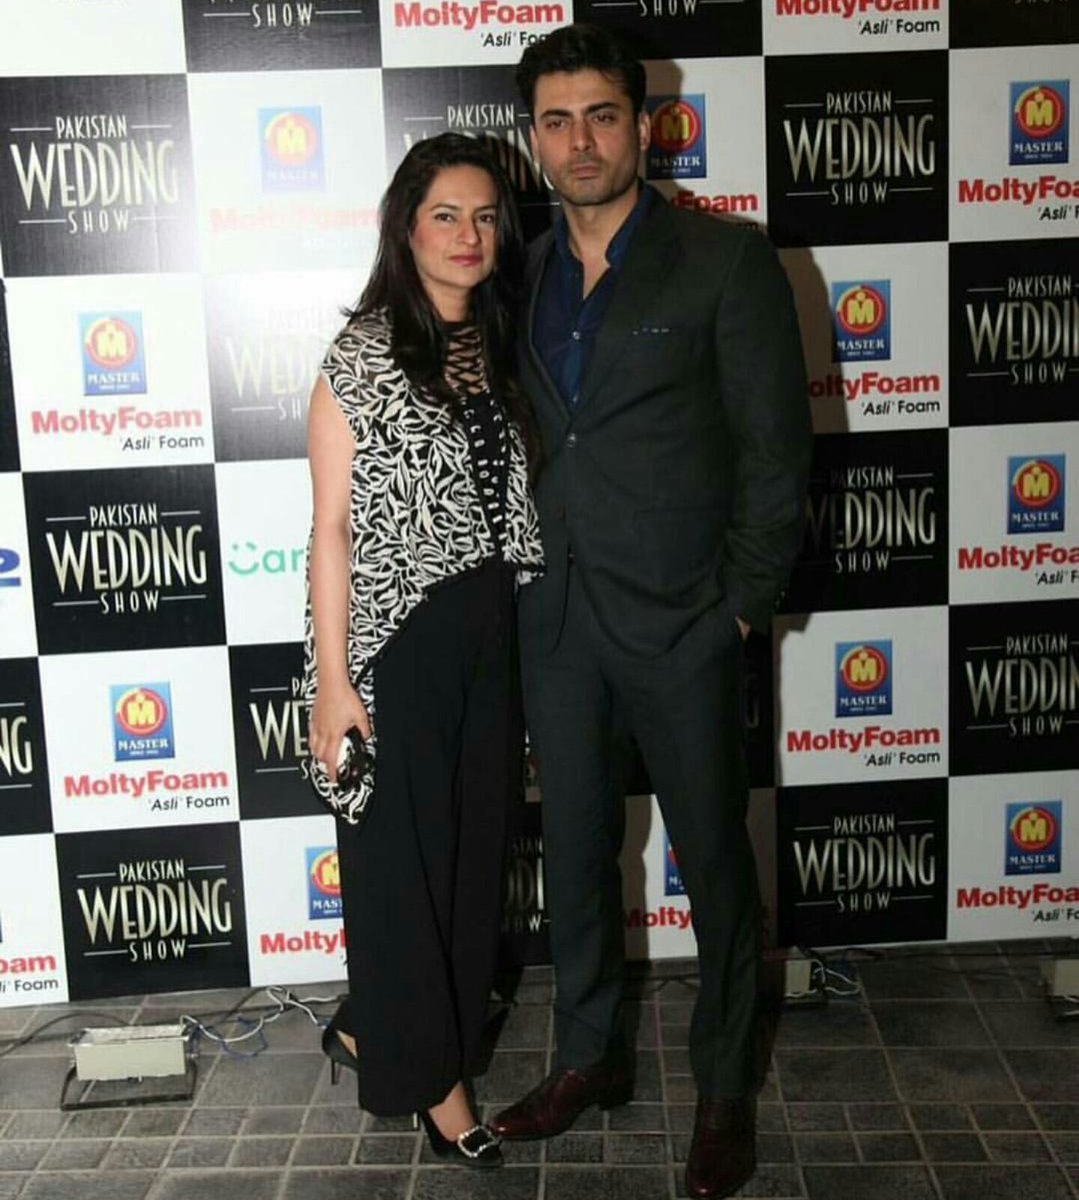 #FawadKhan with wifey at the launch of #PakistanWeddingShow all set to happen on 5th & 6th of Aug at #Lahore Expo Center!
#JbnJaws #CartelPR